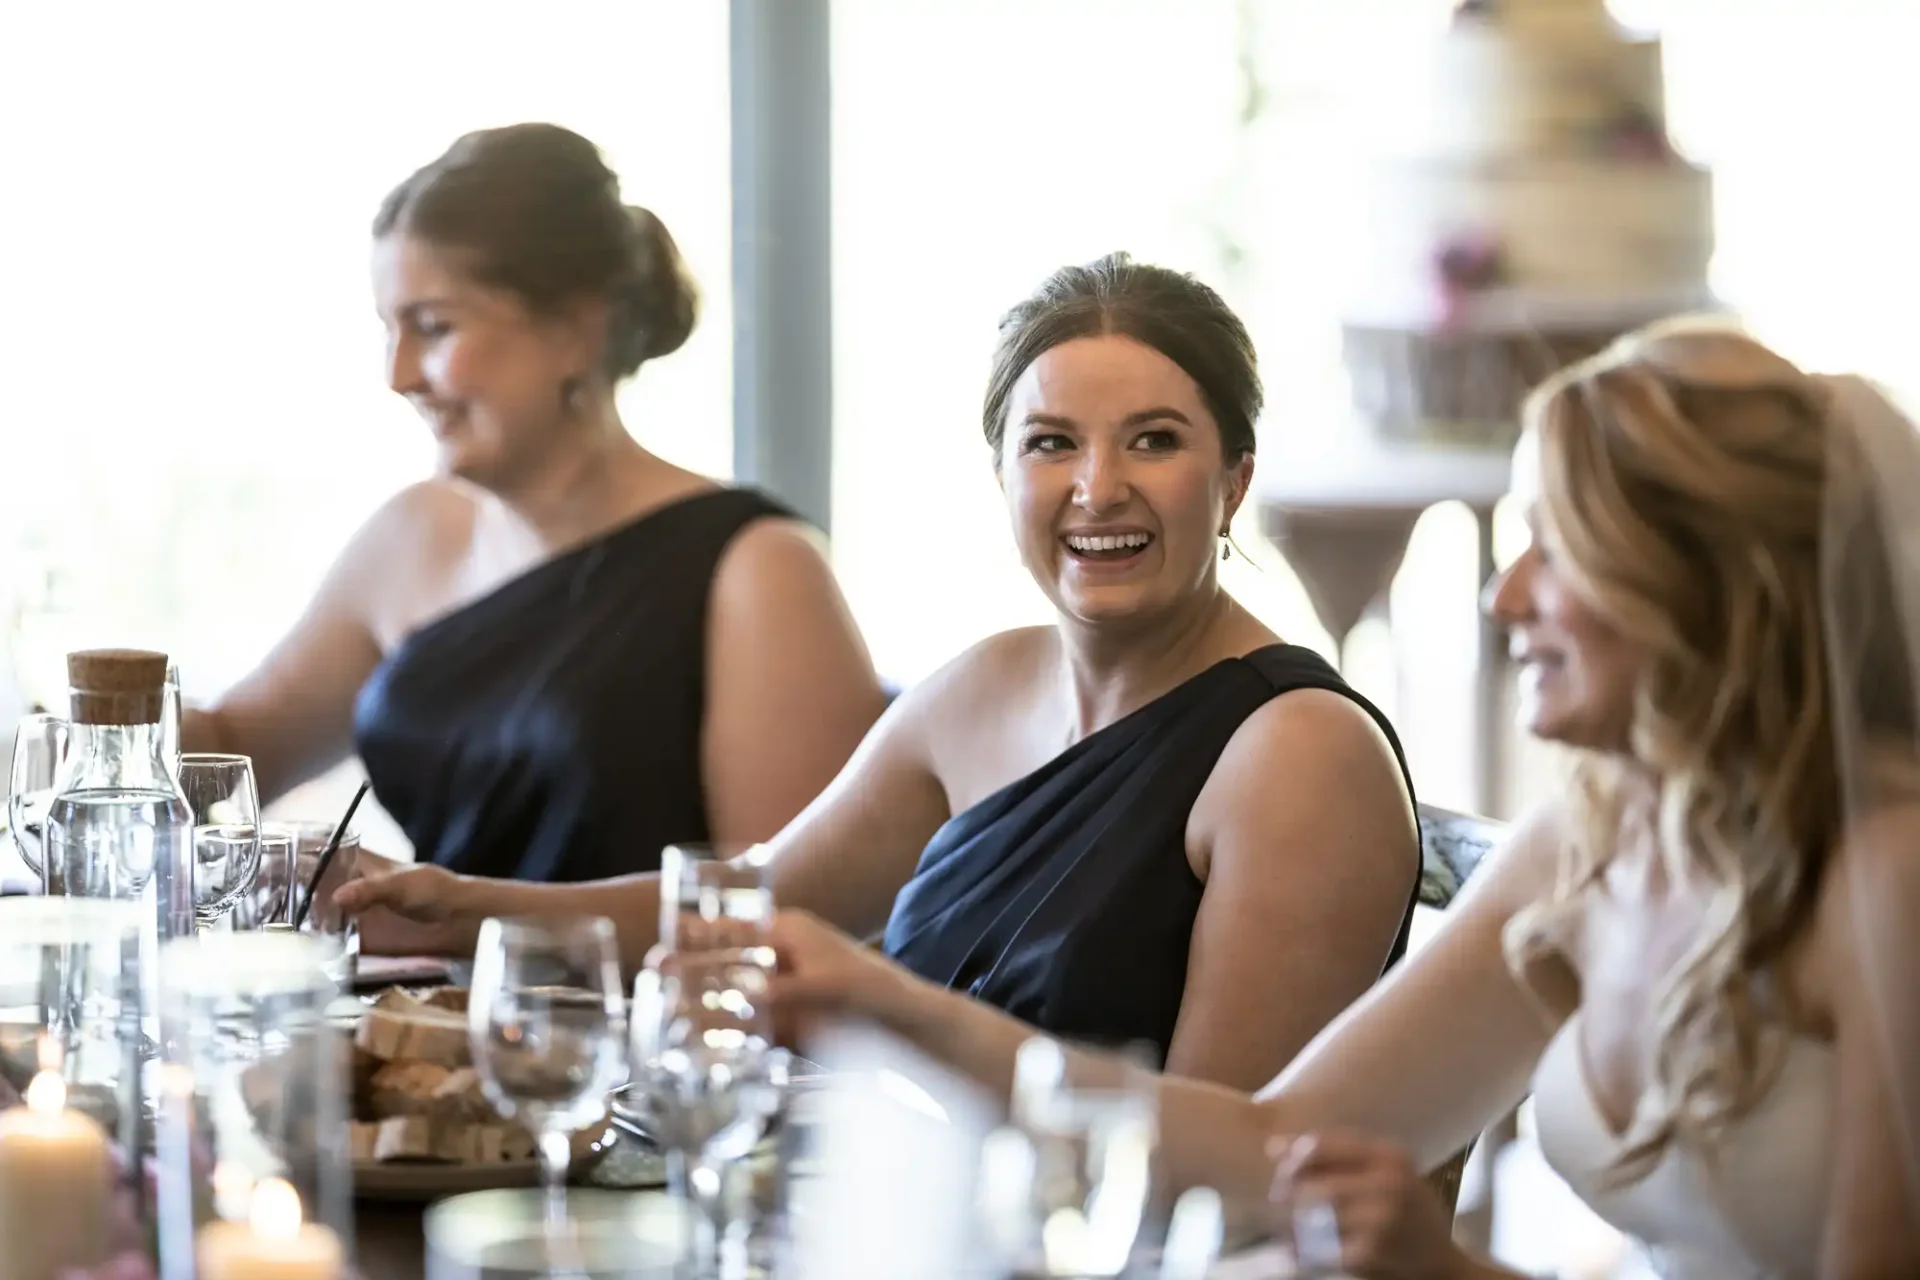 Three women in elegant black dresses smiling and sitting at a dining table during a festive event.